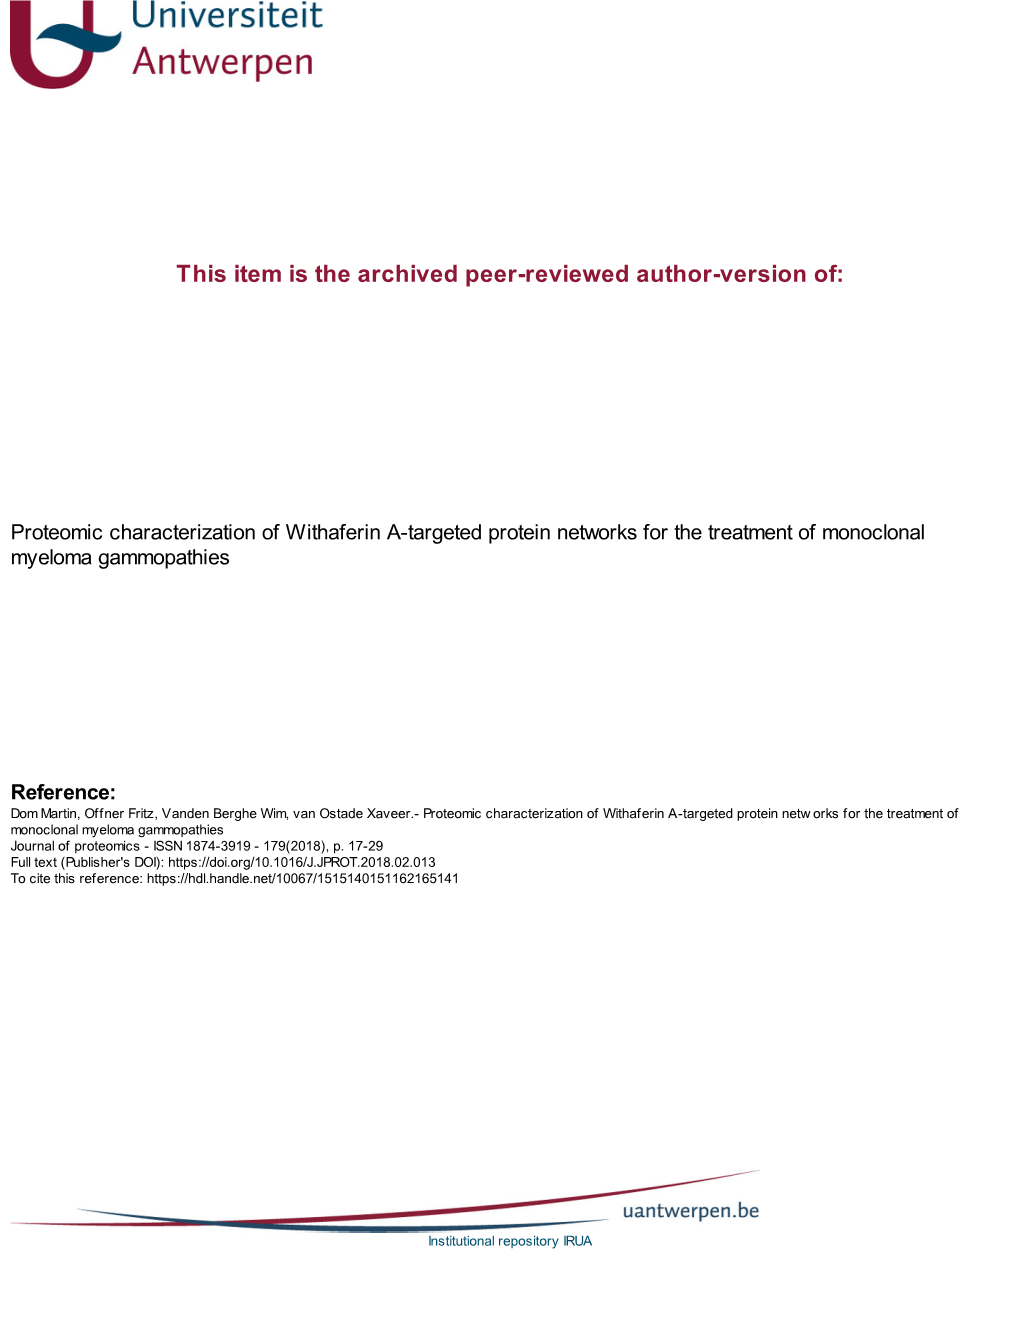 Proteomic Characterization of Withaferin A-Targeted Protein Networks for the Treatment of Monoclonal Myeloma Gammopathies